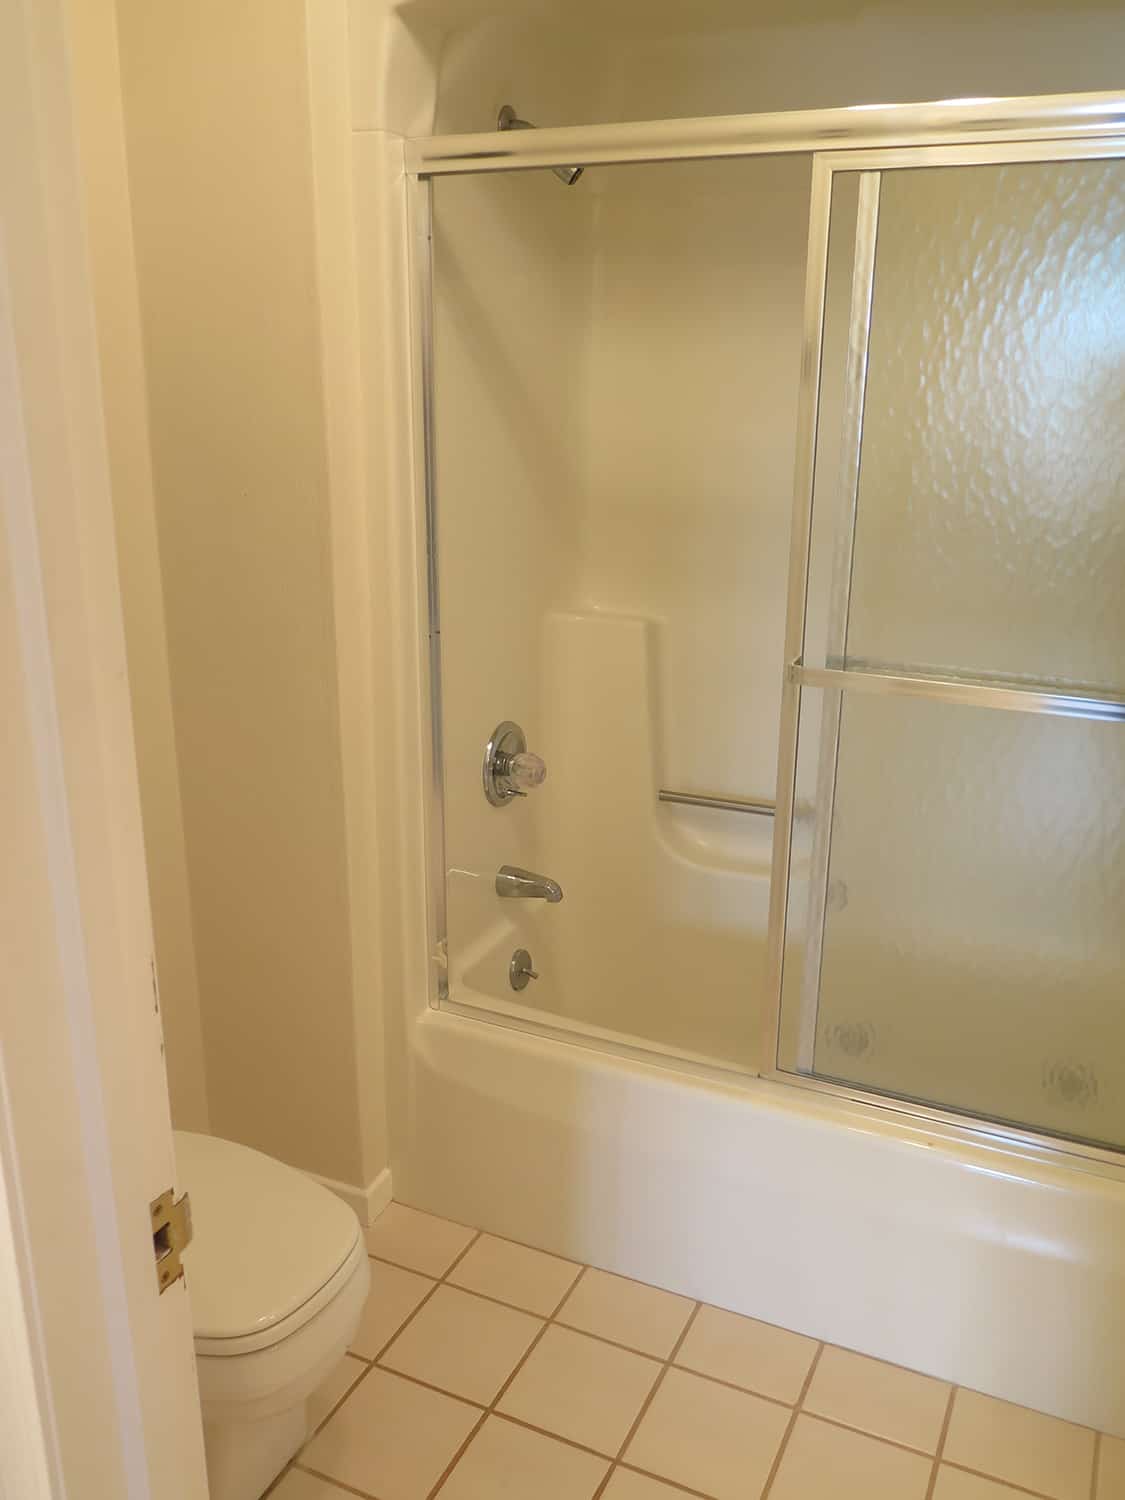 old tub shower combo with dated slider